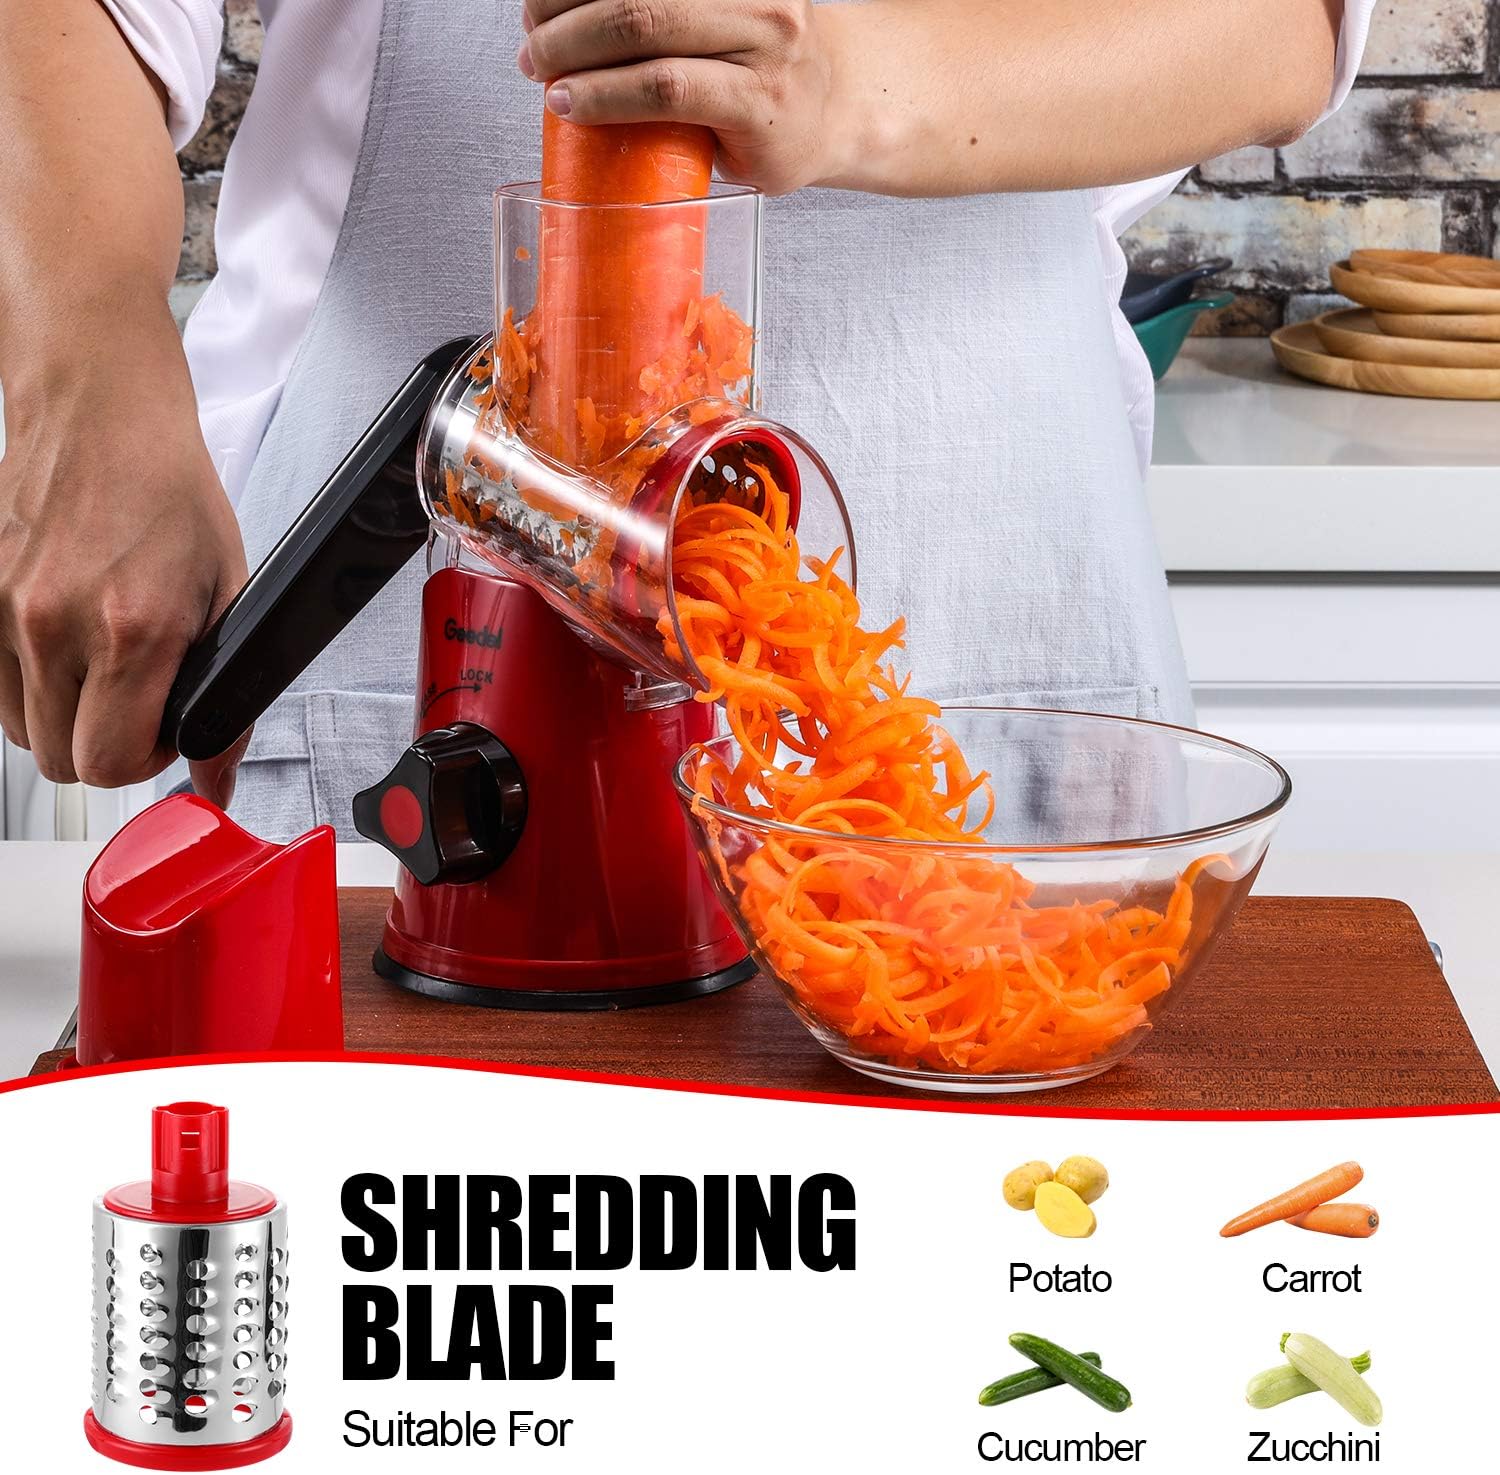 Geedel Rotary Cheese Grater, Kitchen Mandoline Vegetable Slicer with 3 Interchangeable Blades, Easy to Clean Grater for Fruit, Vegetables, Nuts - havana shop